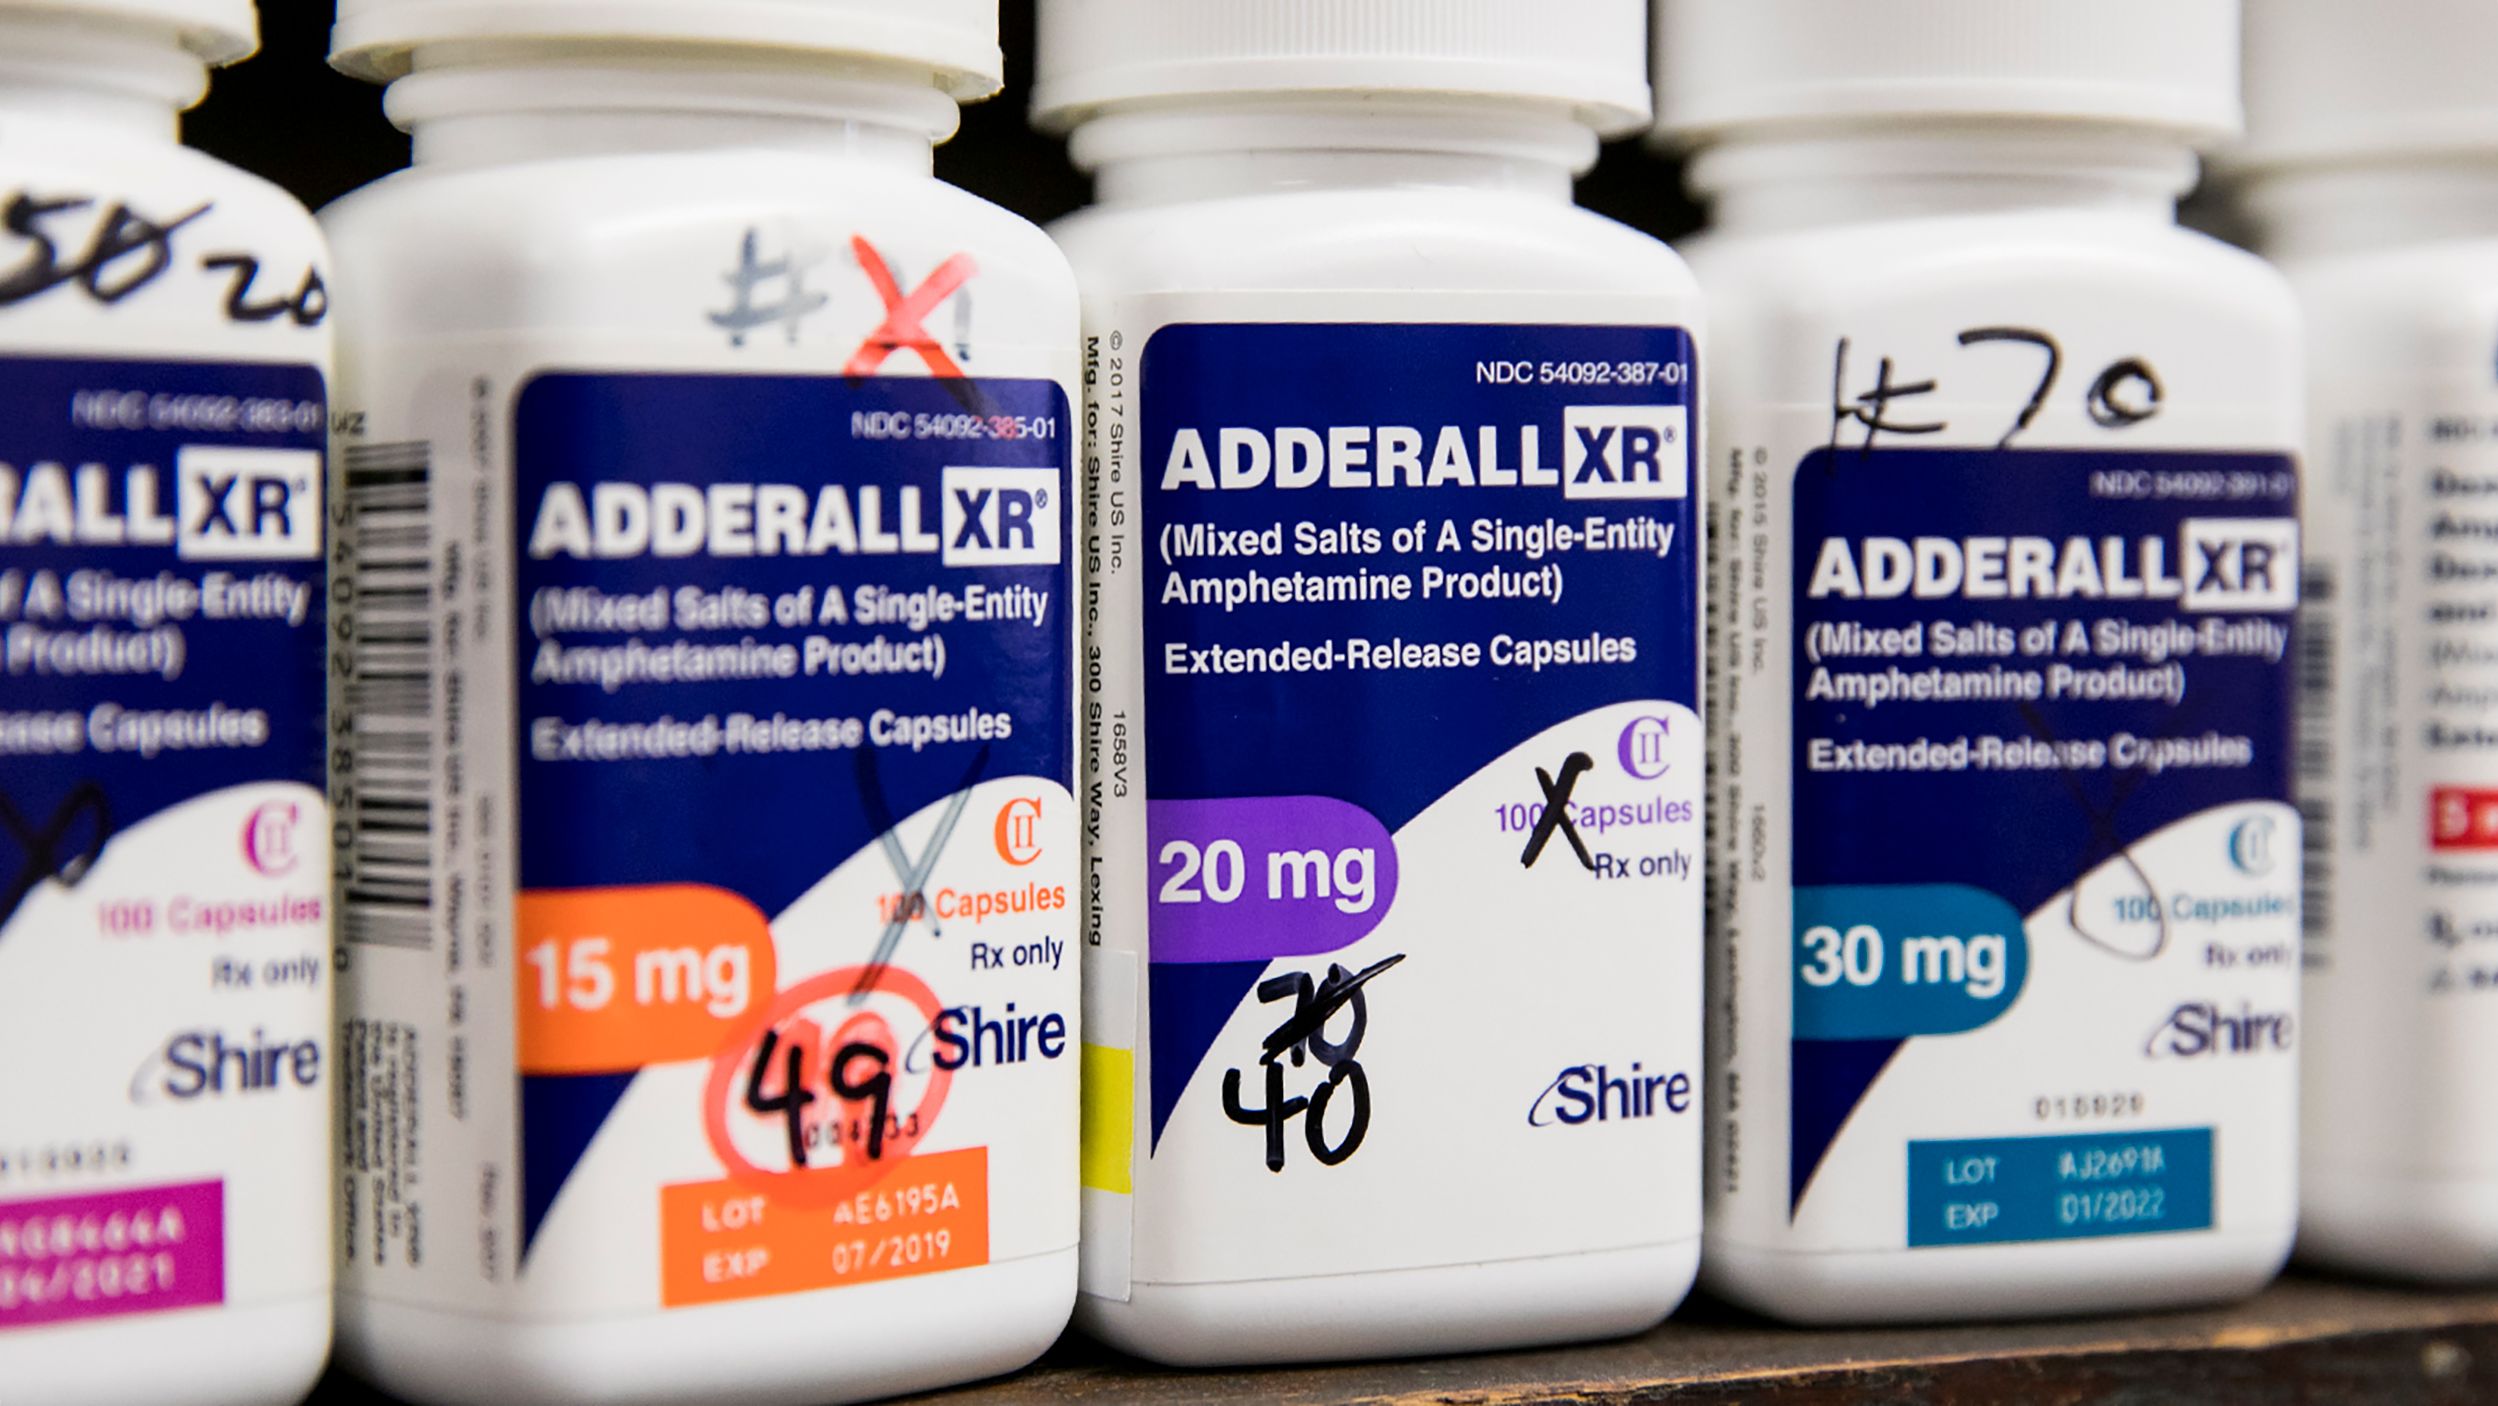 The FDA says an Adderall shortage is expected to last another 30 to 60 days.